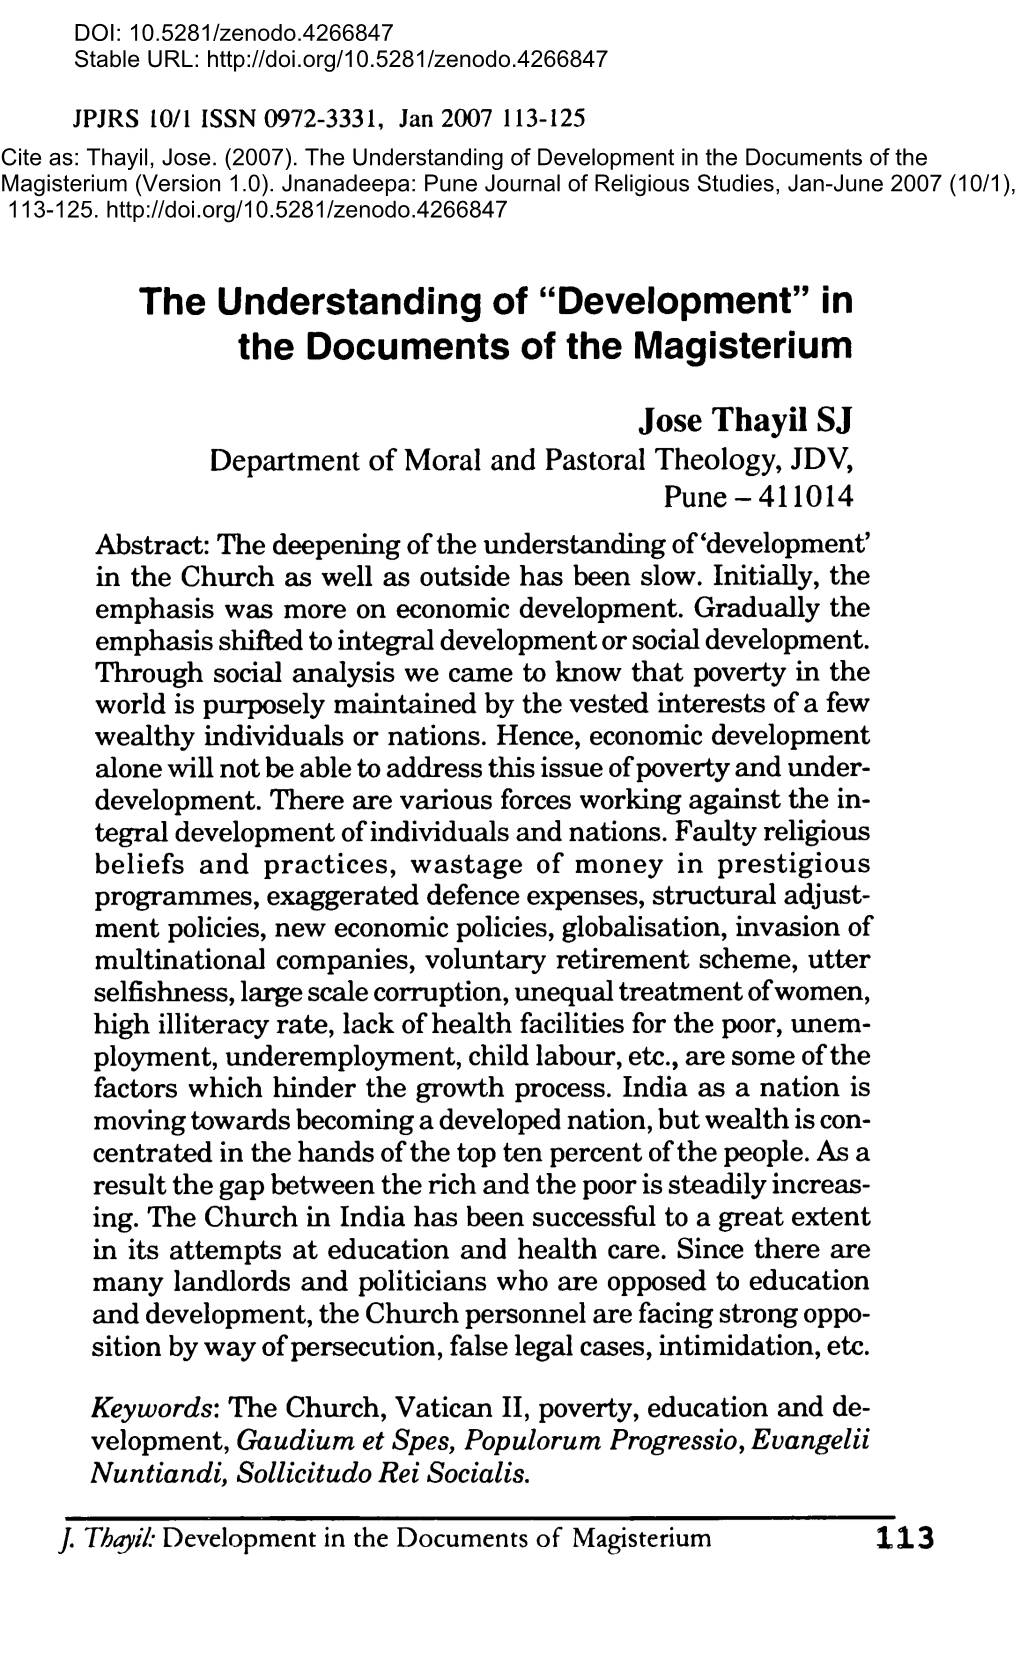 The Understanding of “Development” in the Documents of the Magisterium